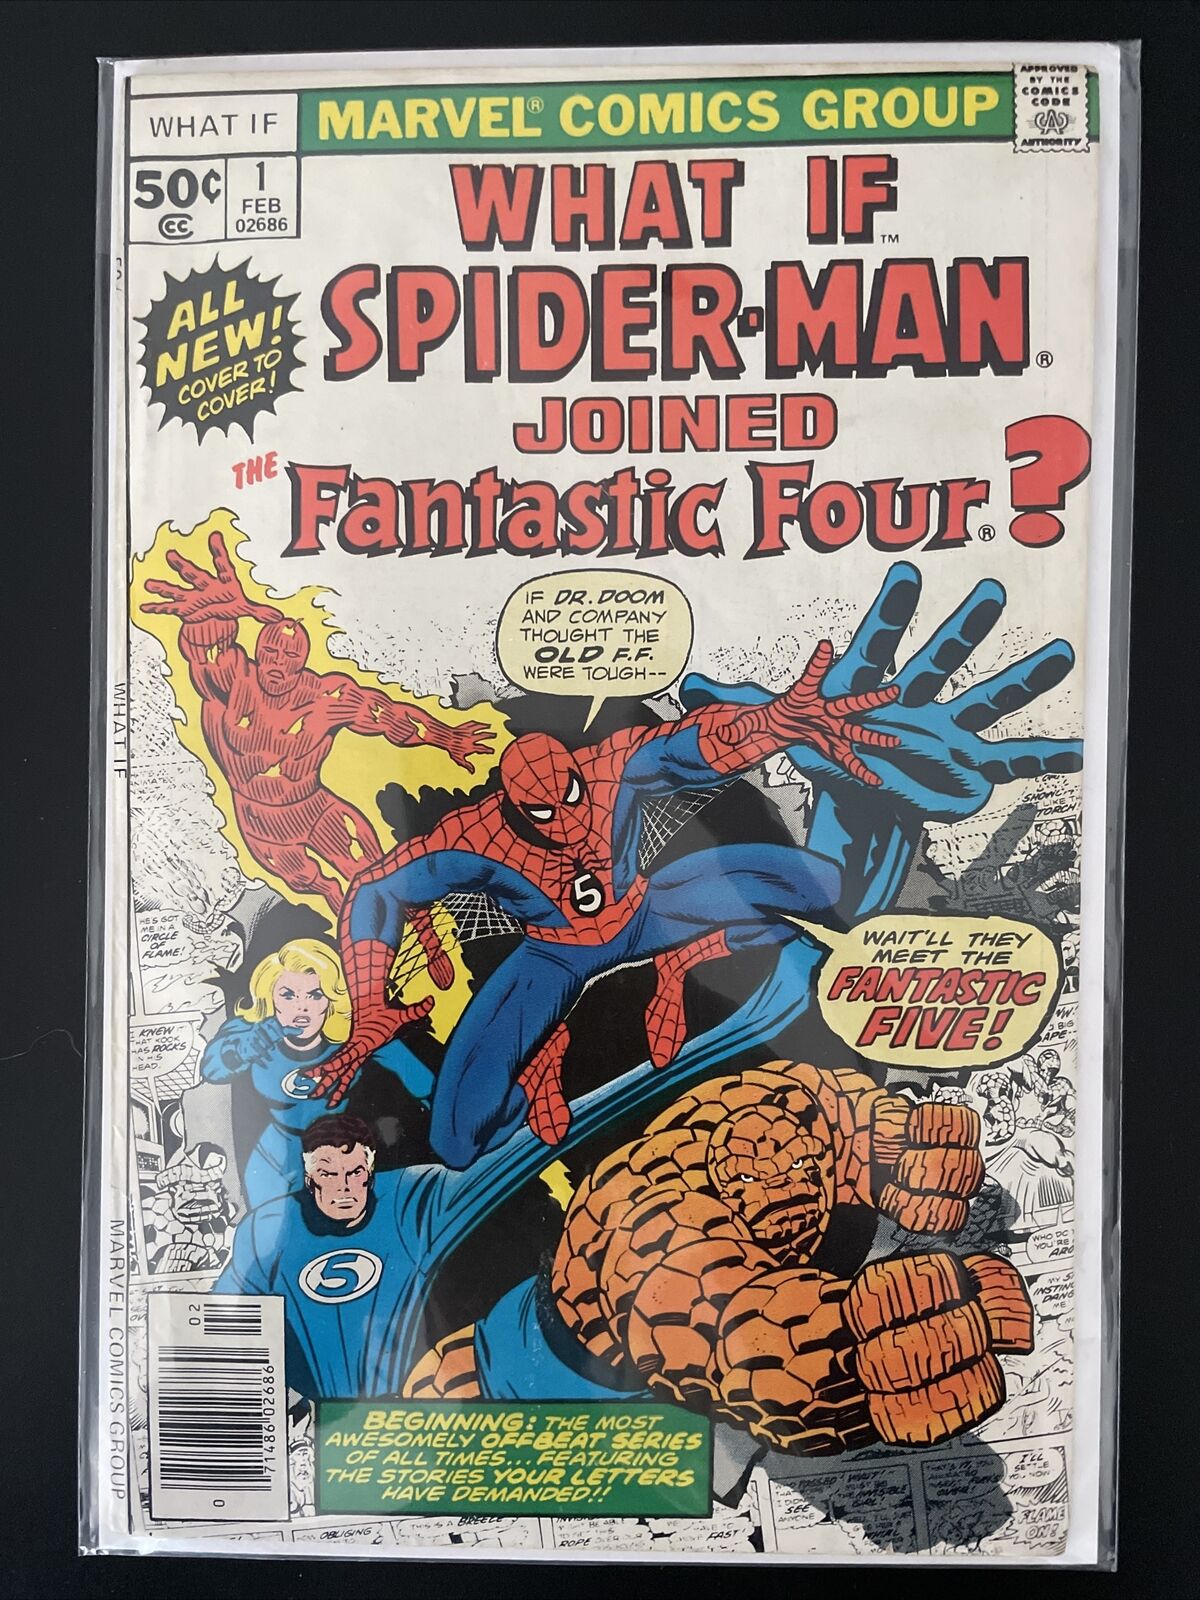 What If #1 Spider-Man Joined The Fantastic Four? (Feb 1977, Marvel Comics)